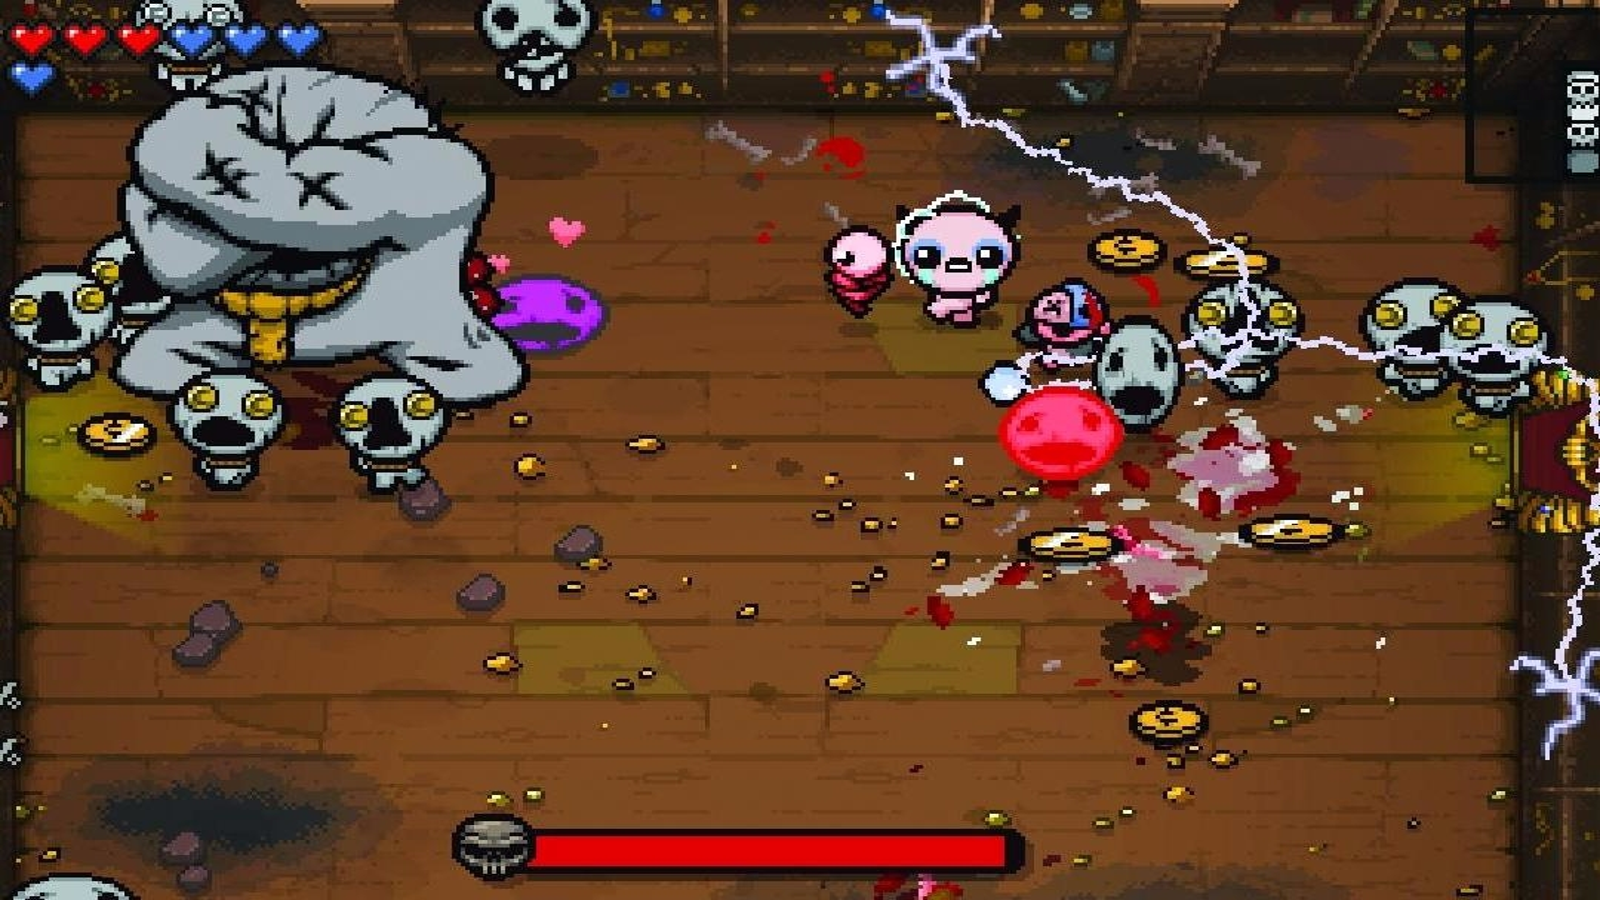 The Binding of Isaac: Afterbirth+ Switch retail release confirmed